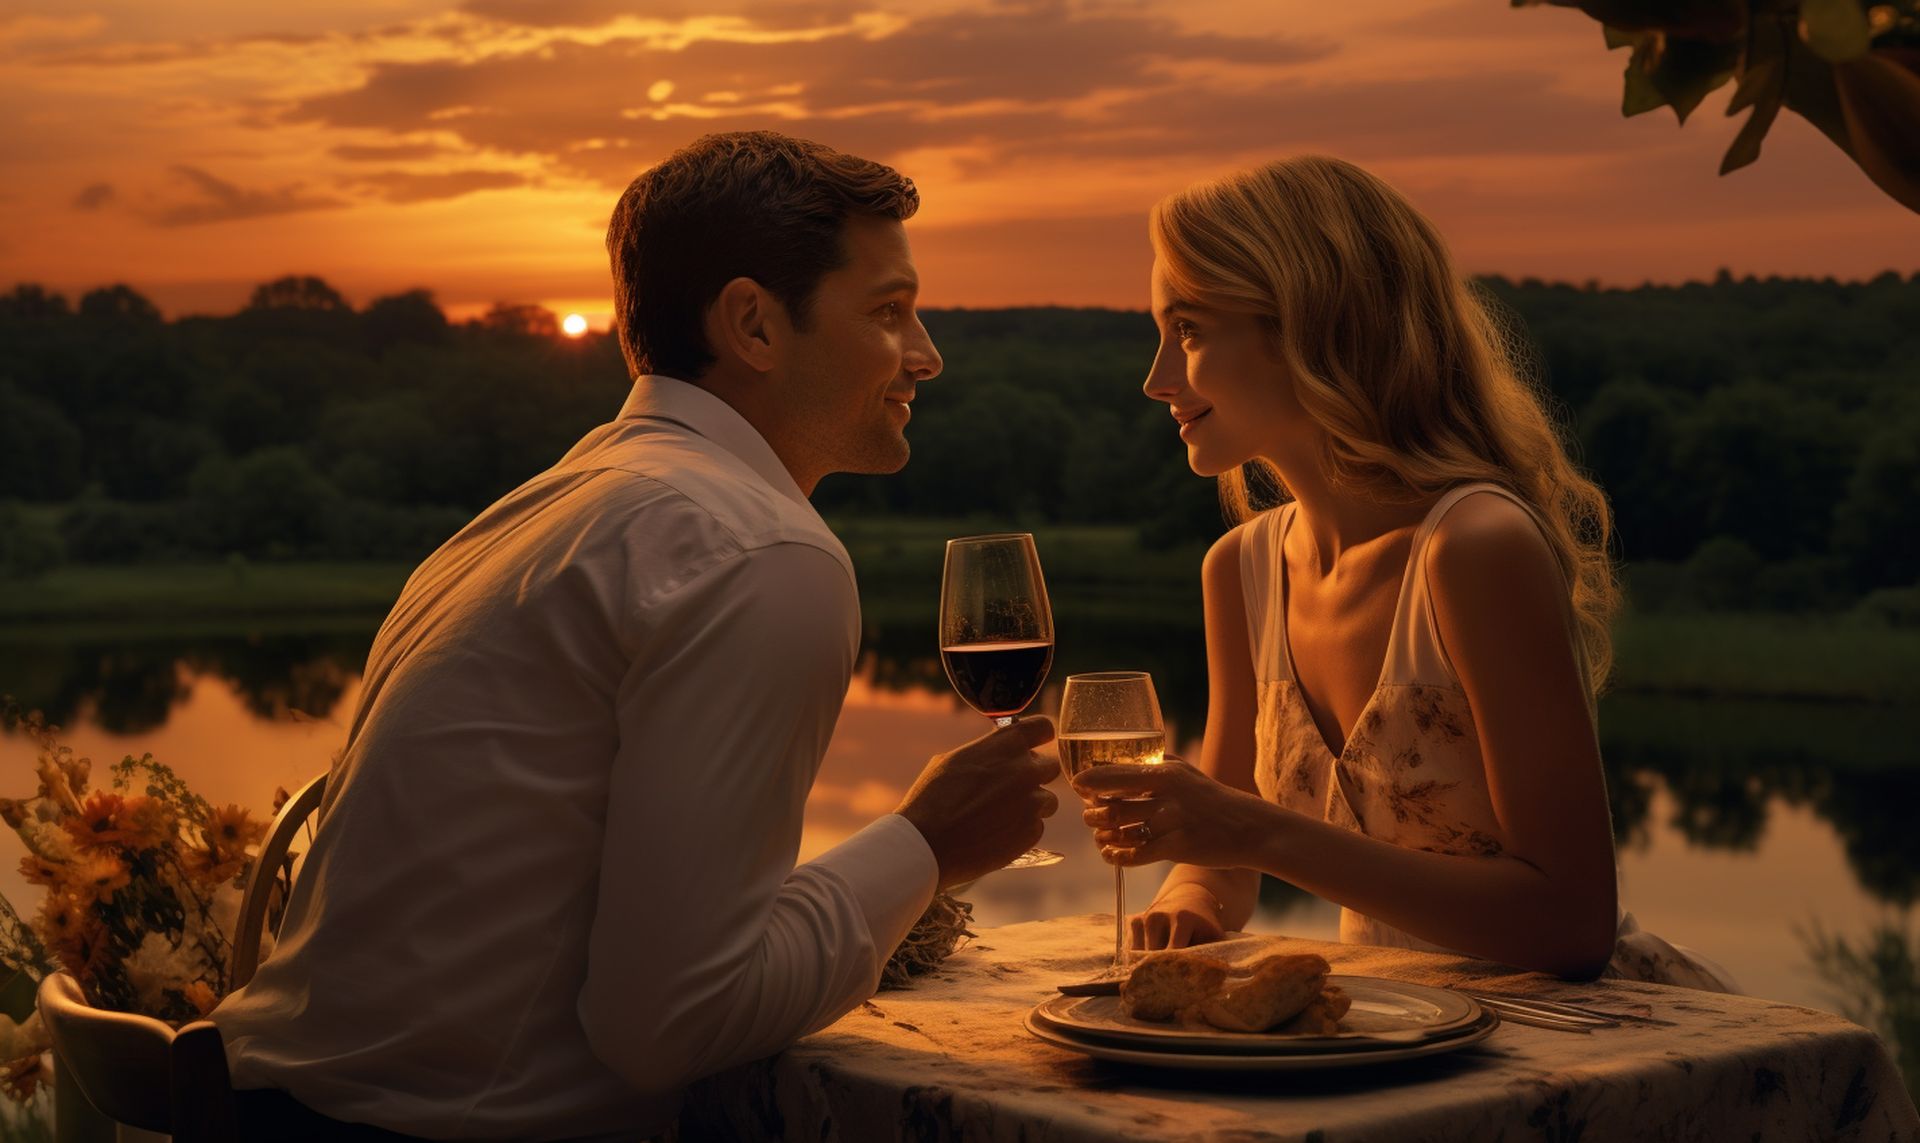 Valentine's Day Recipes: an elegant outdoor setting with white wine chilling, a couple sharing a loving glance, backdrop of a dreamy sunset,. | Image credit: Merasturda Enkeste